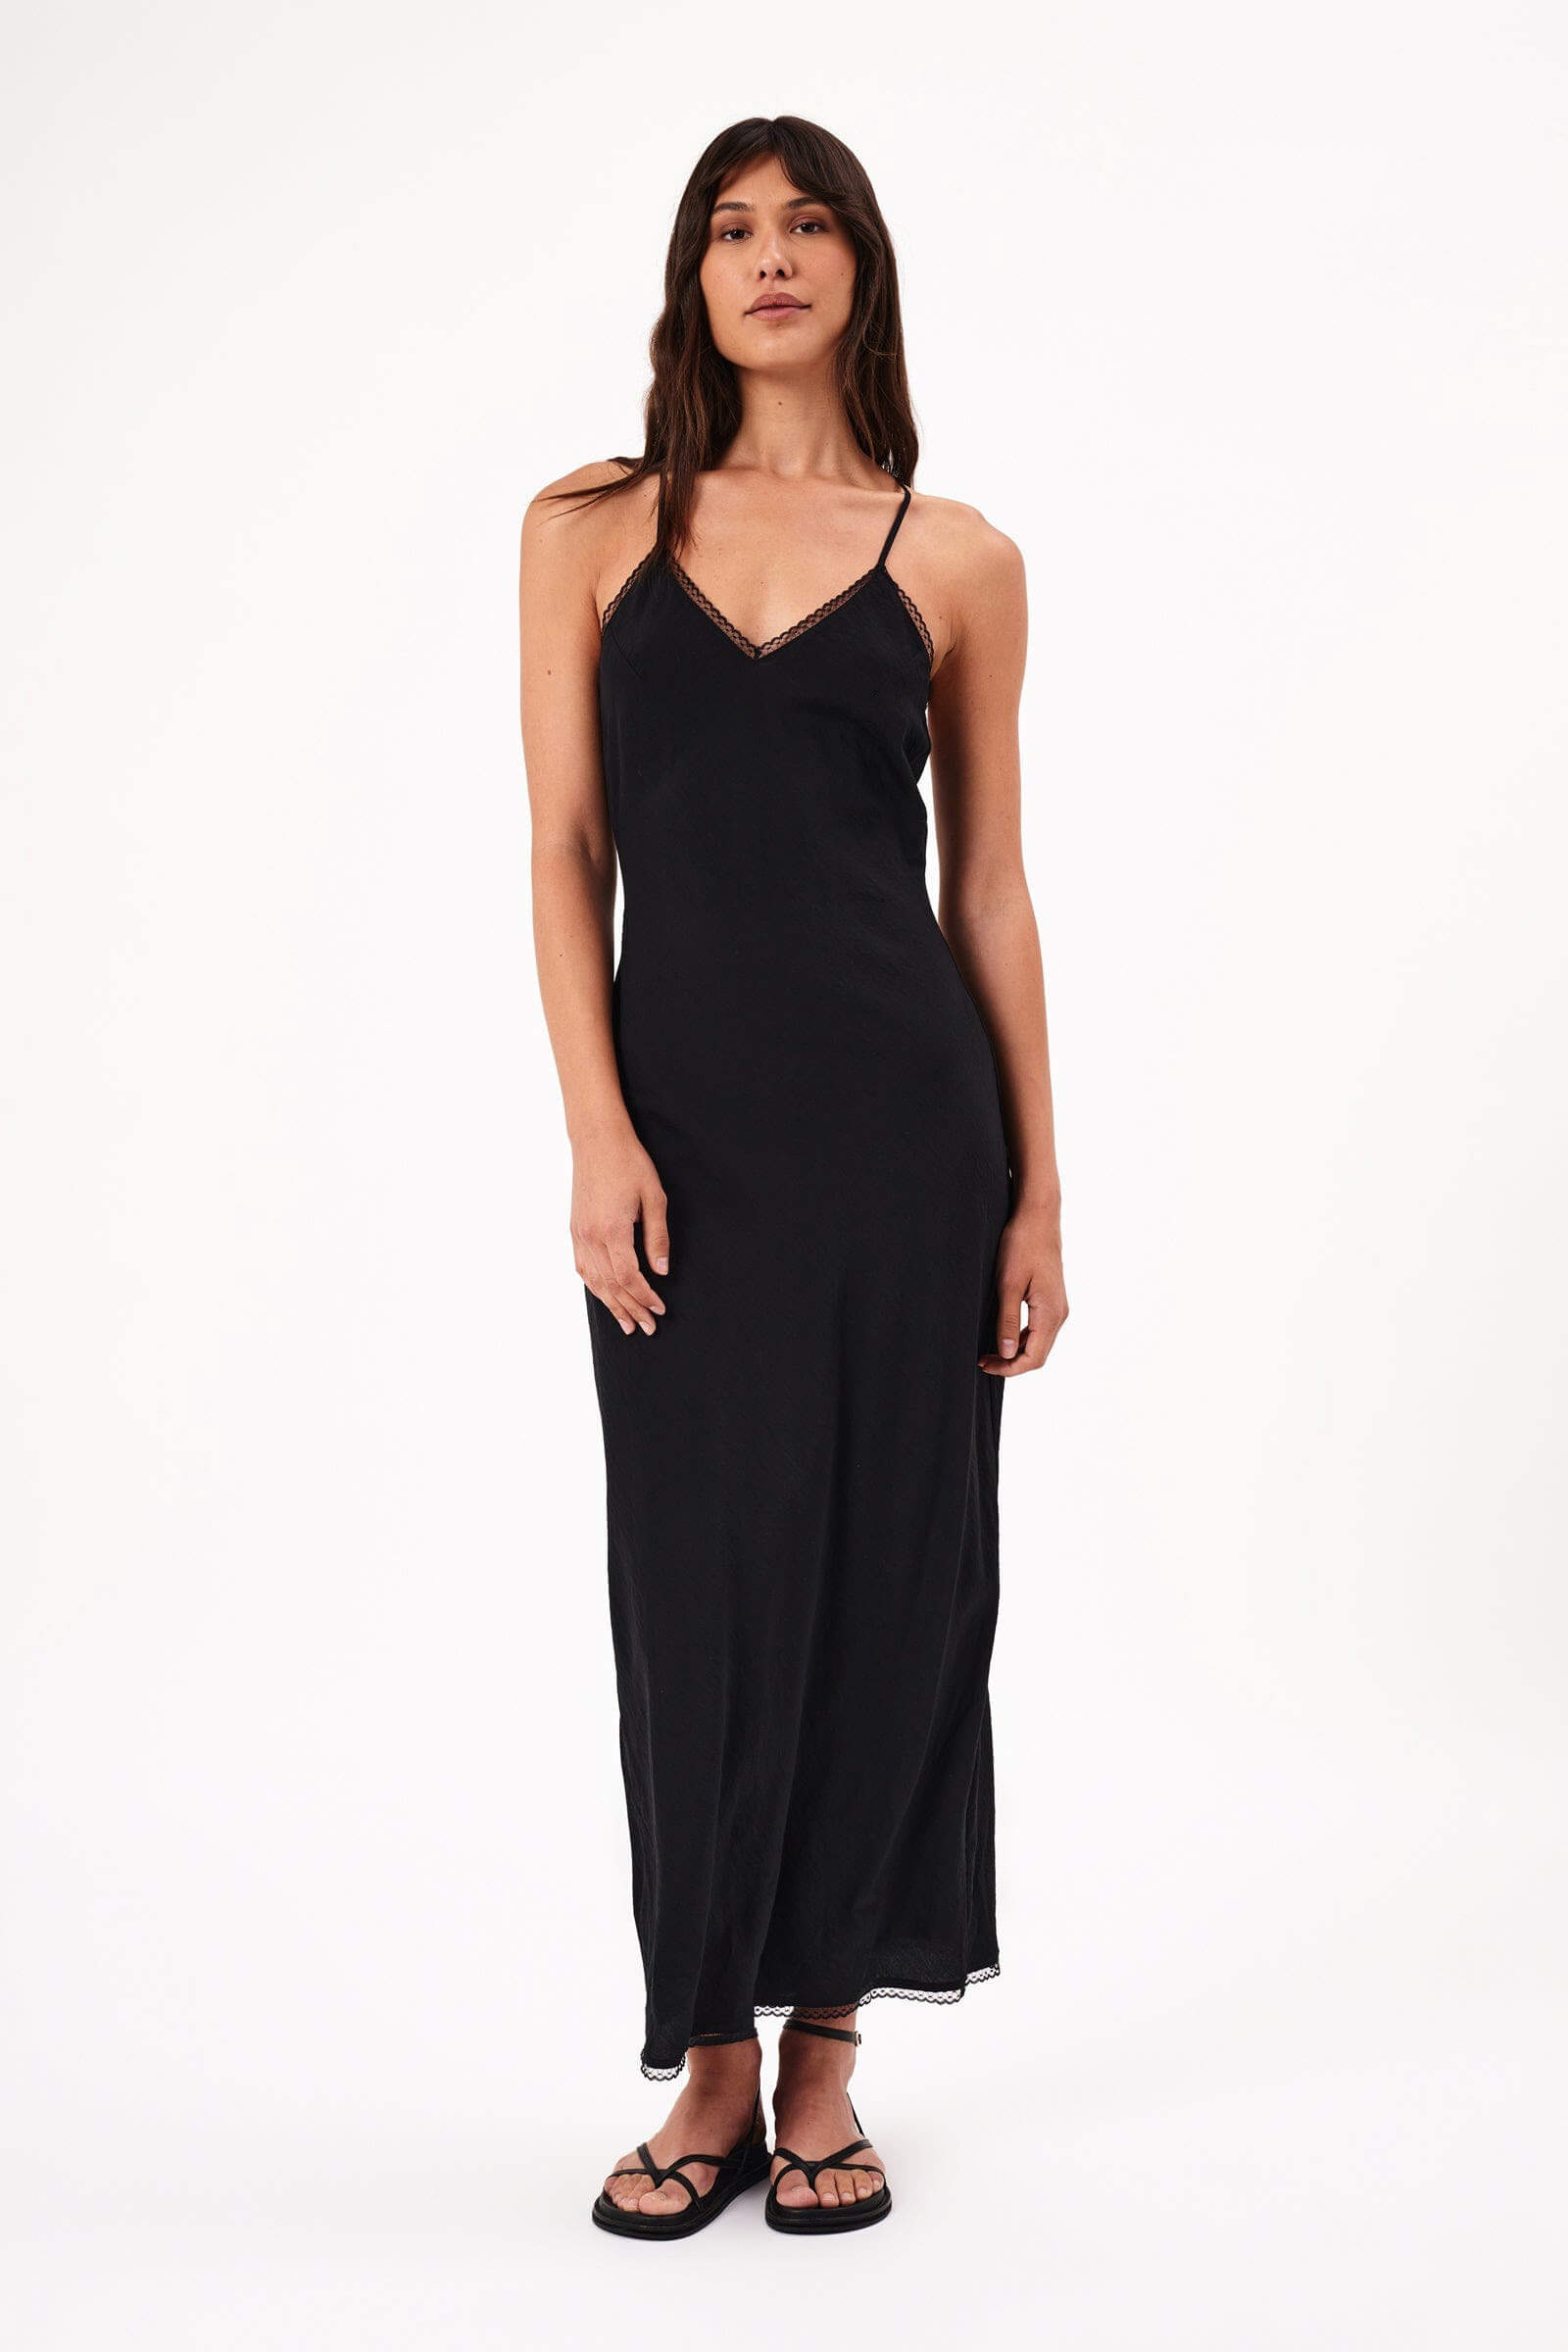 Rolla's Jeans margaux bamboo slip dress in black